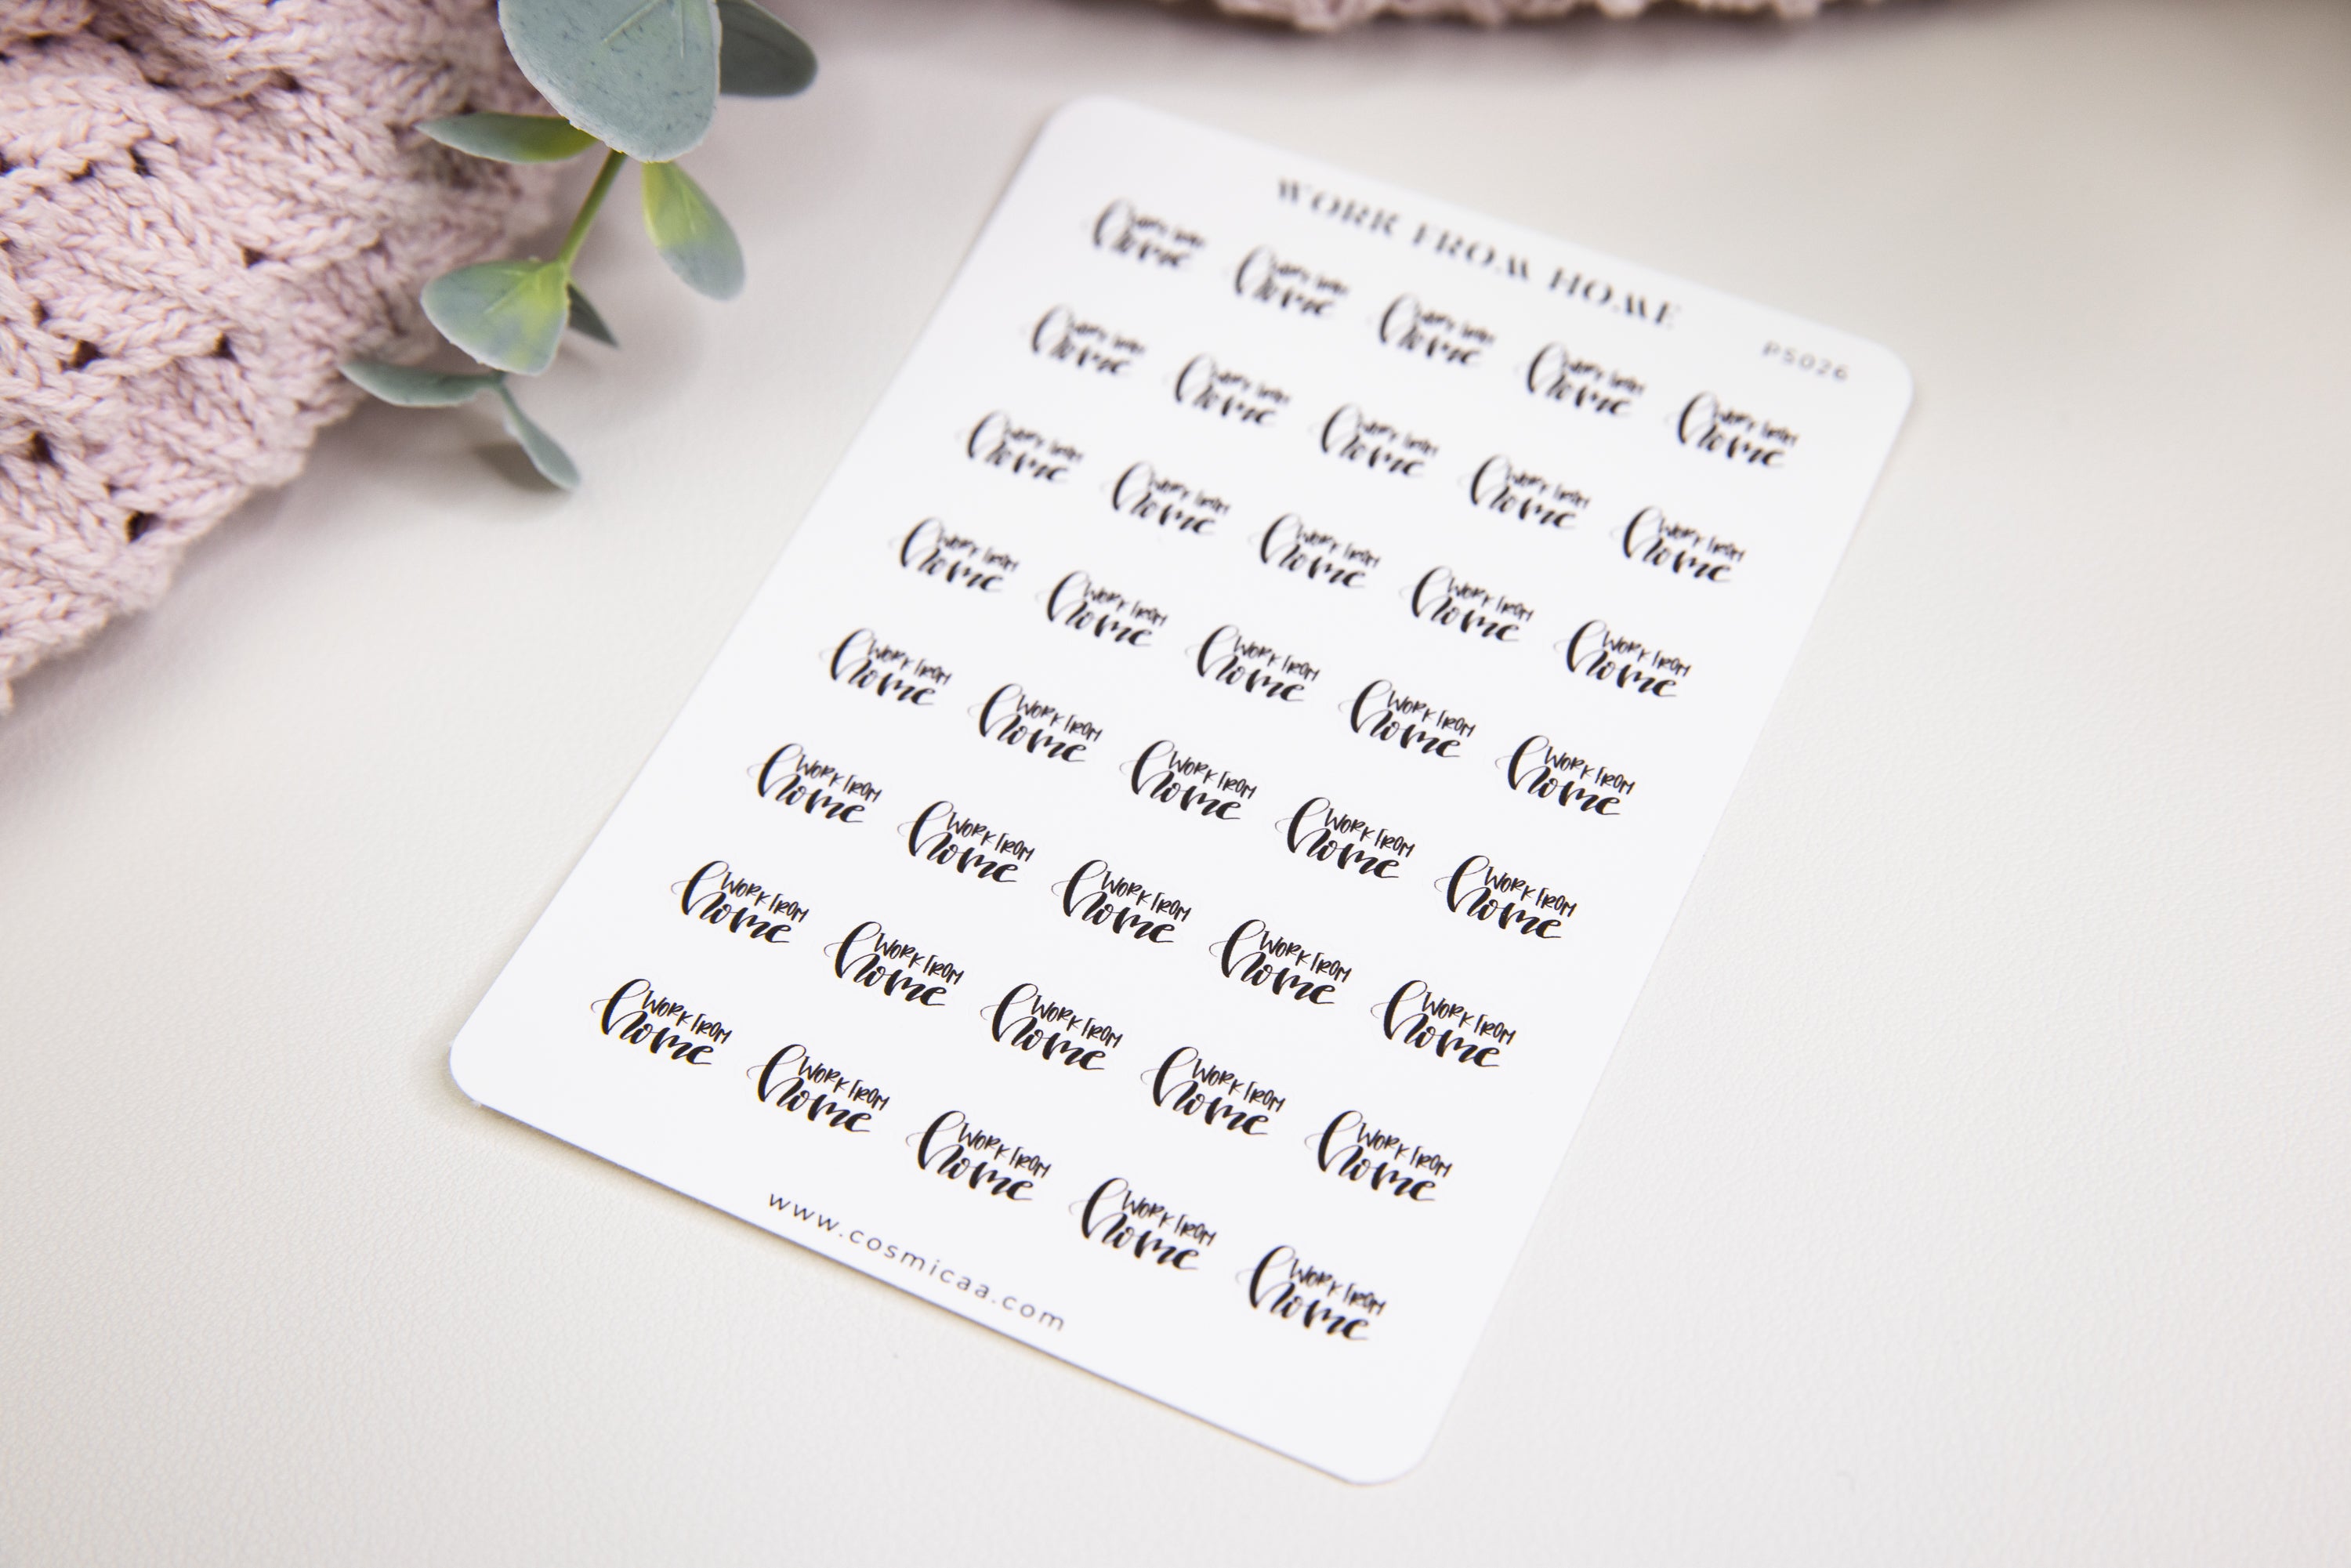 Work From Home - Planner Stickers